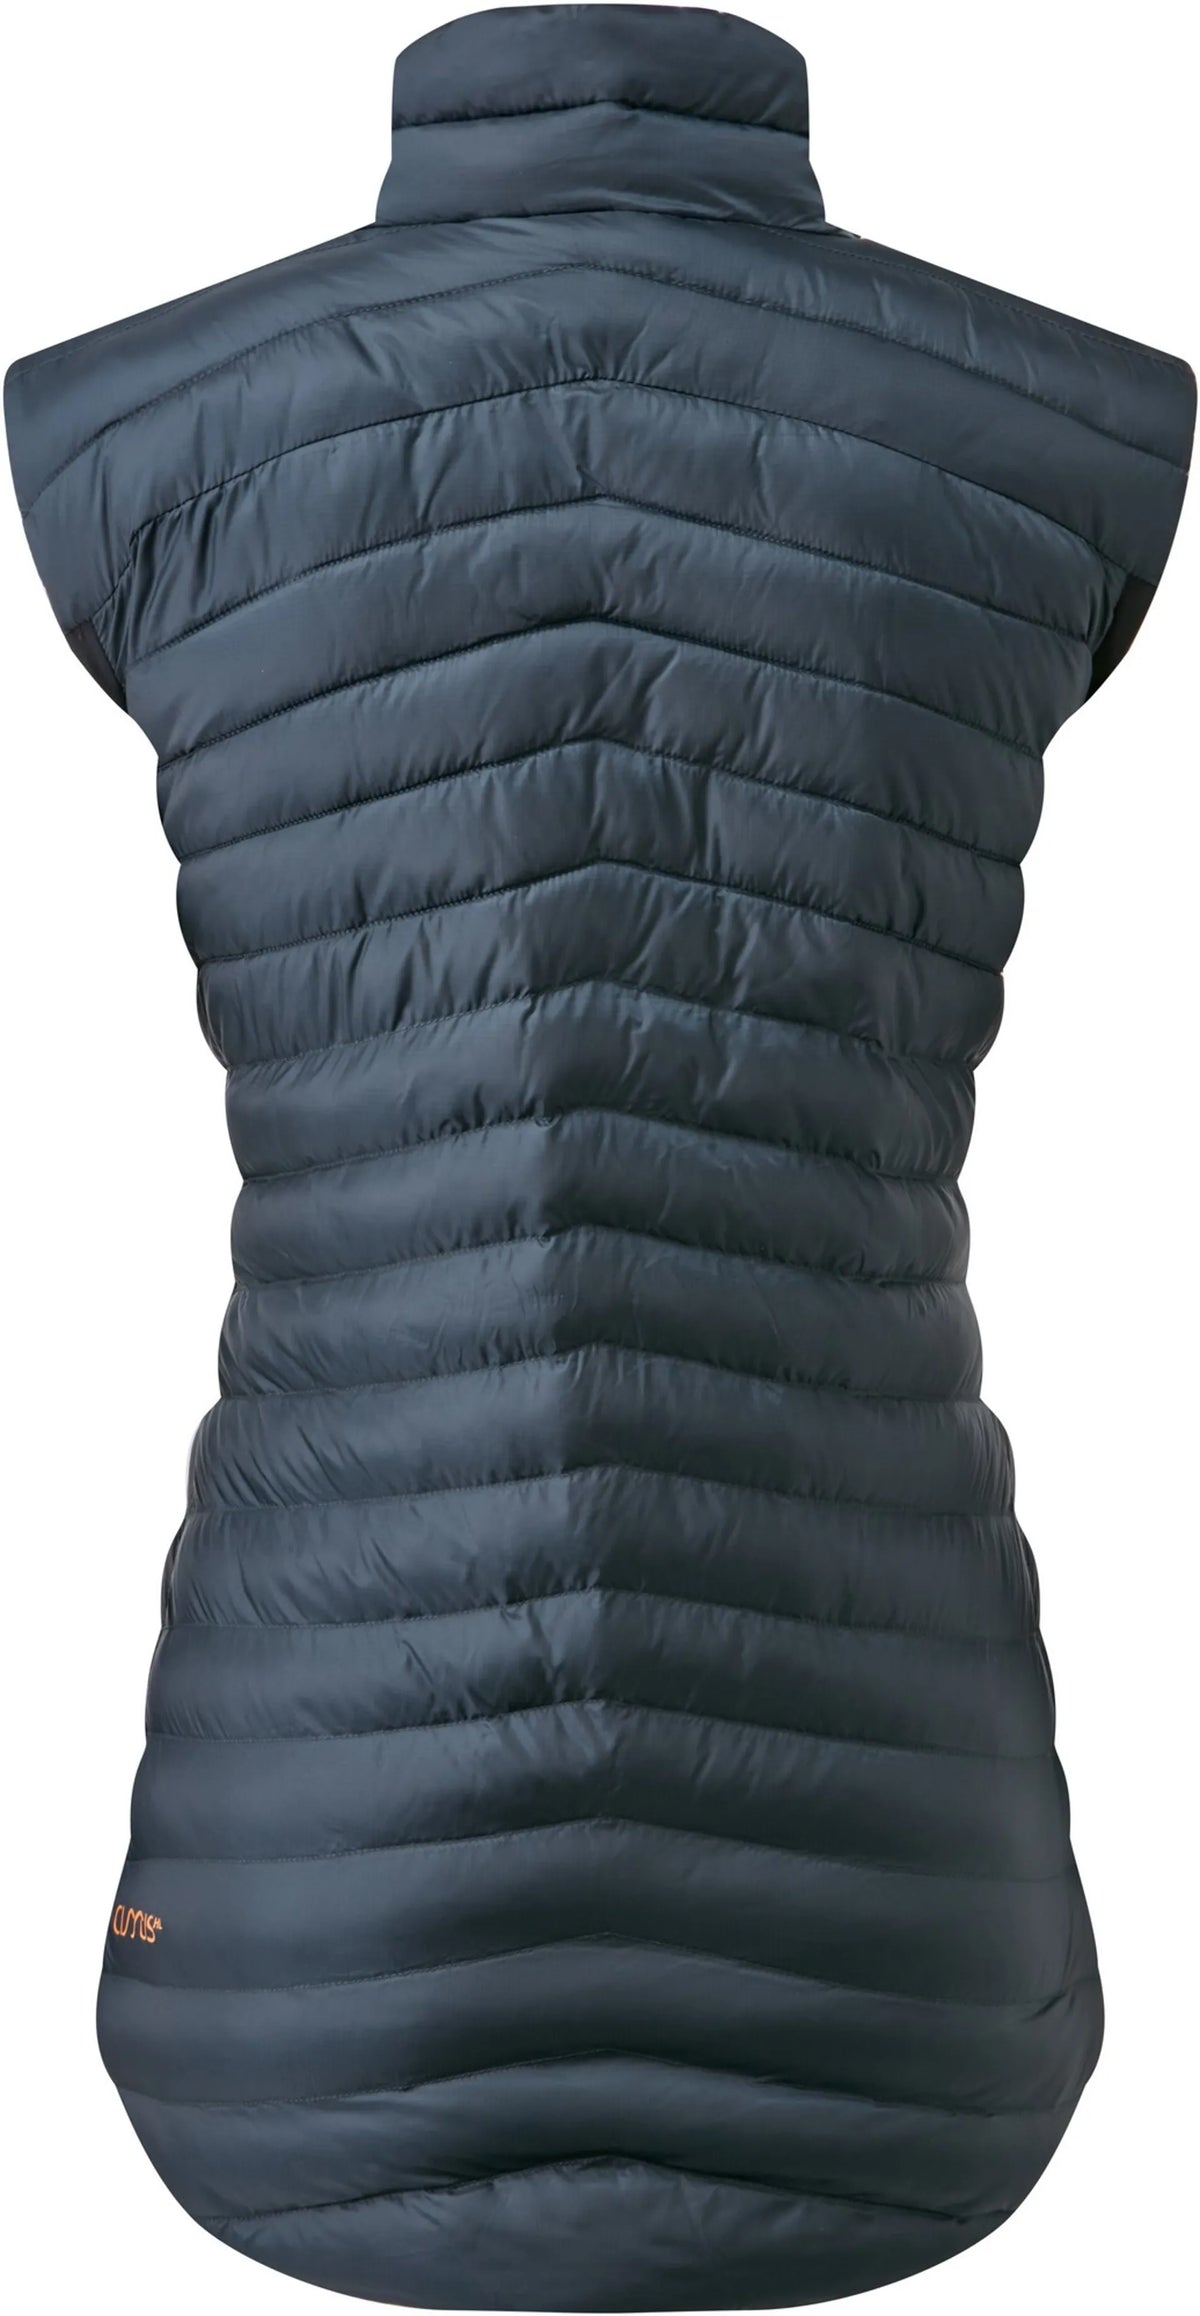 Rab Women&#39;s Cirrus Insulated Vest - Sample Size 12